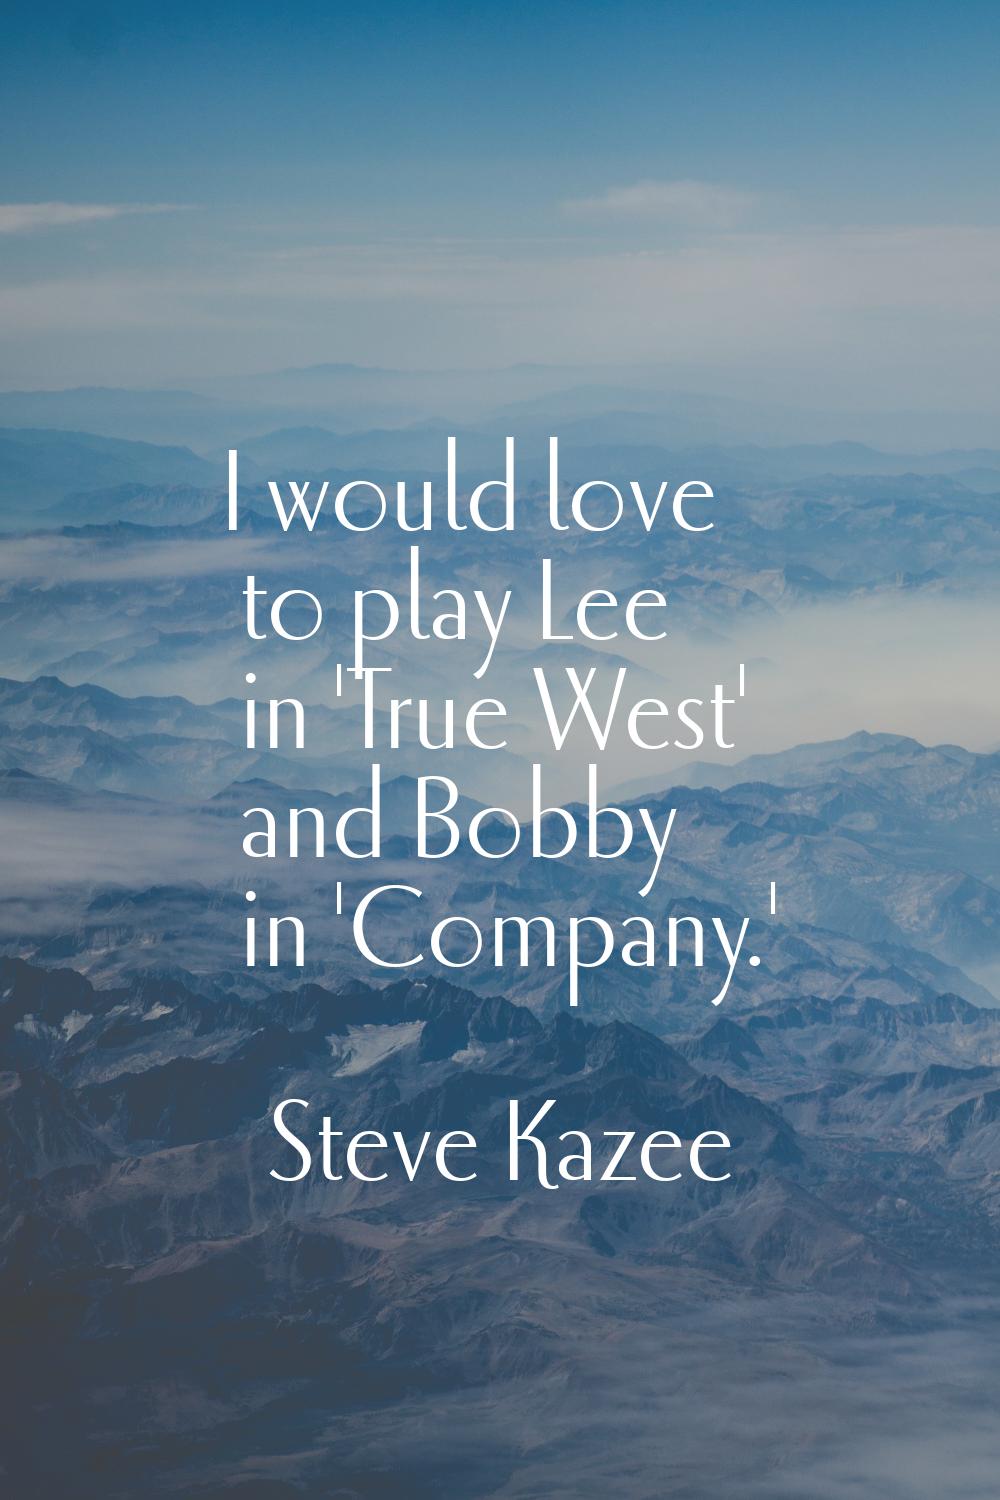 I would love to play Lee in 'True West' and Bobby in 'Company.'